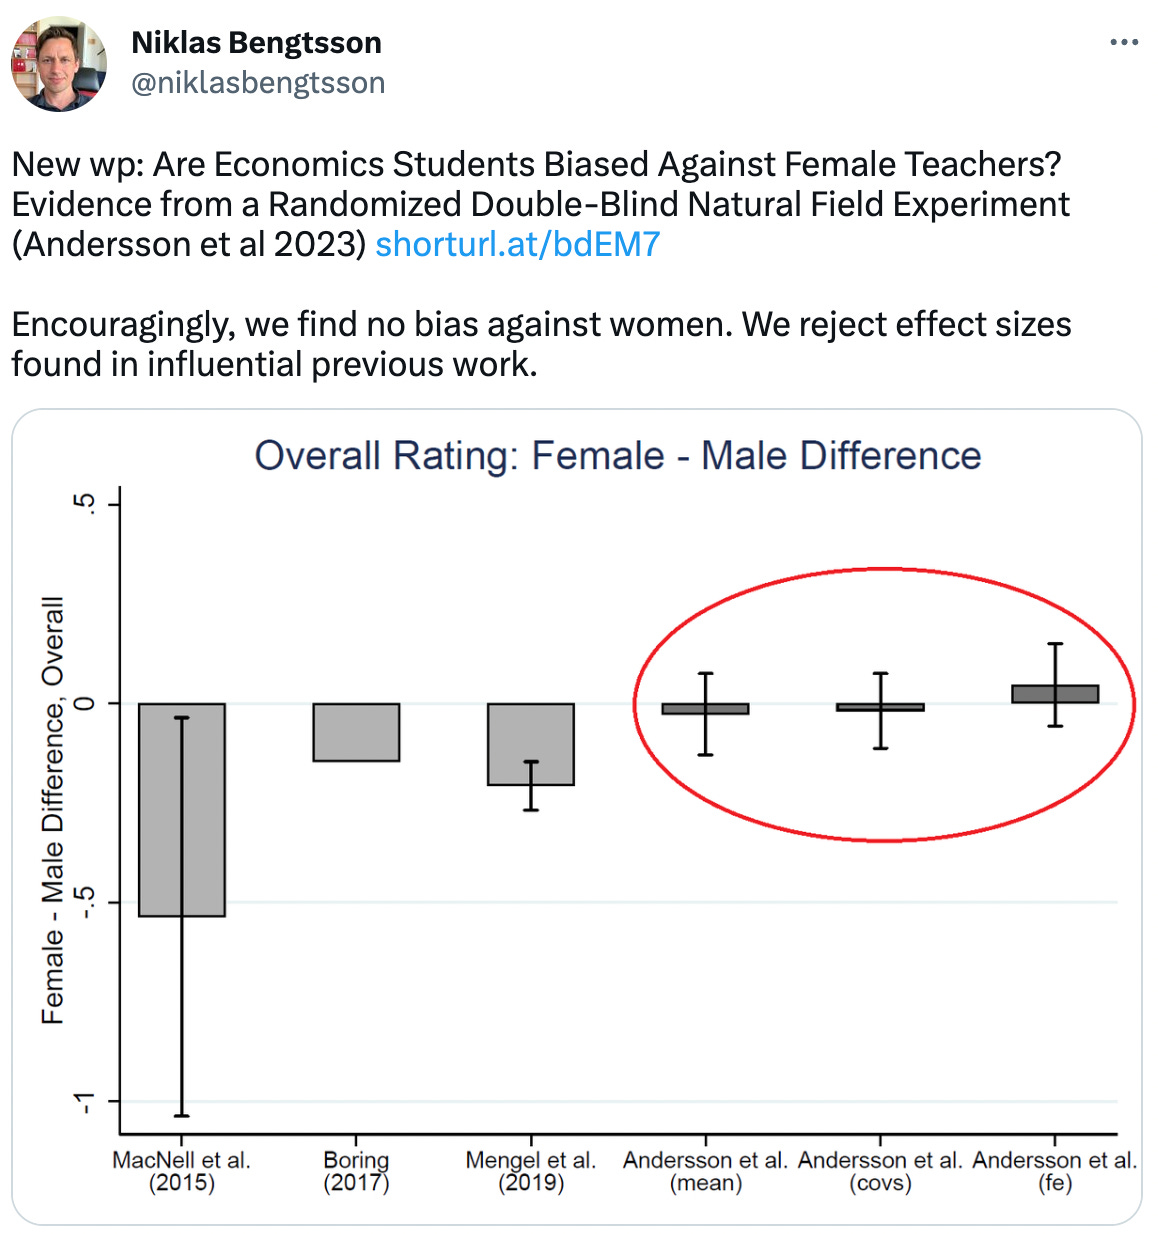  Niklas Bengtsson @niklasbengtsson New wp: Are Economics Students Biased Against Female Teachers? Evidence from a Randomized Double-Blind Natural Field Experiment (Andersson et al 2023) https://shorturl.at/bdEM7  Encouragingly, we find no bias against women. We reject effect sizes found in influential previous work.